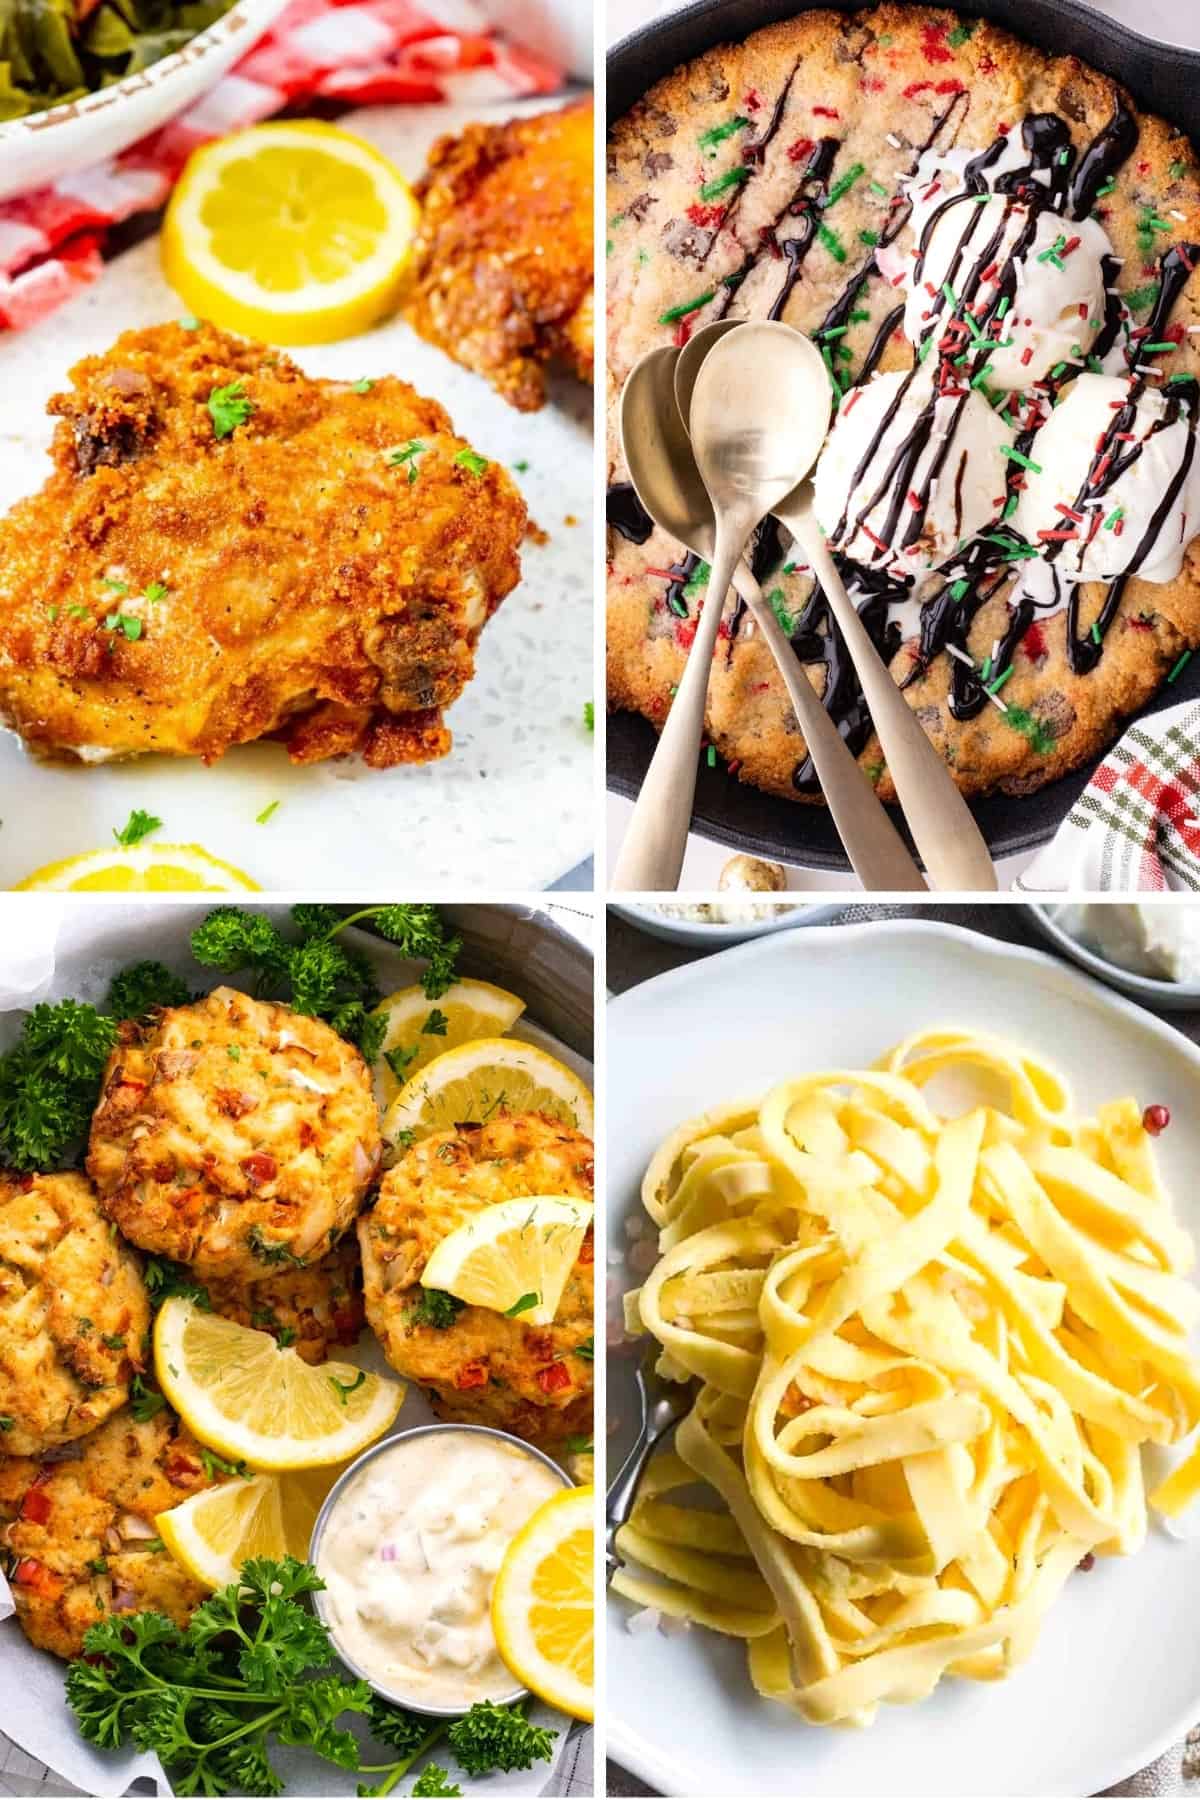 almond flour recipes like keto fried chicken, keto skillet cookie, air fryer crab cakes, and keto egg noodles with almond flour